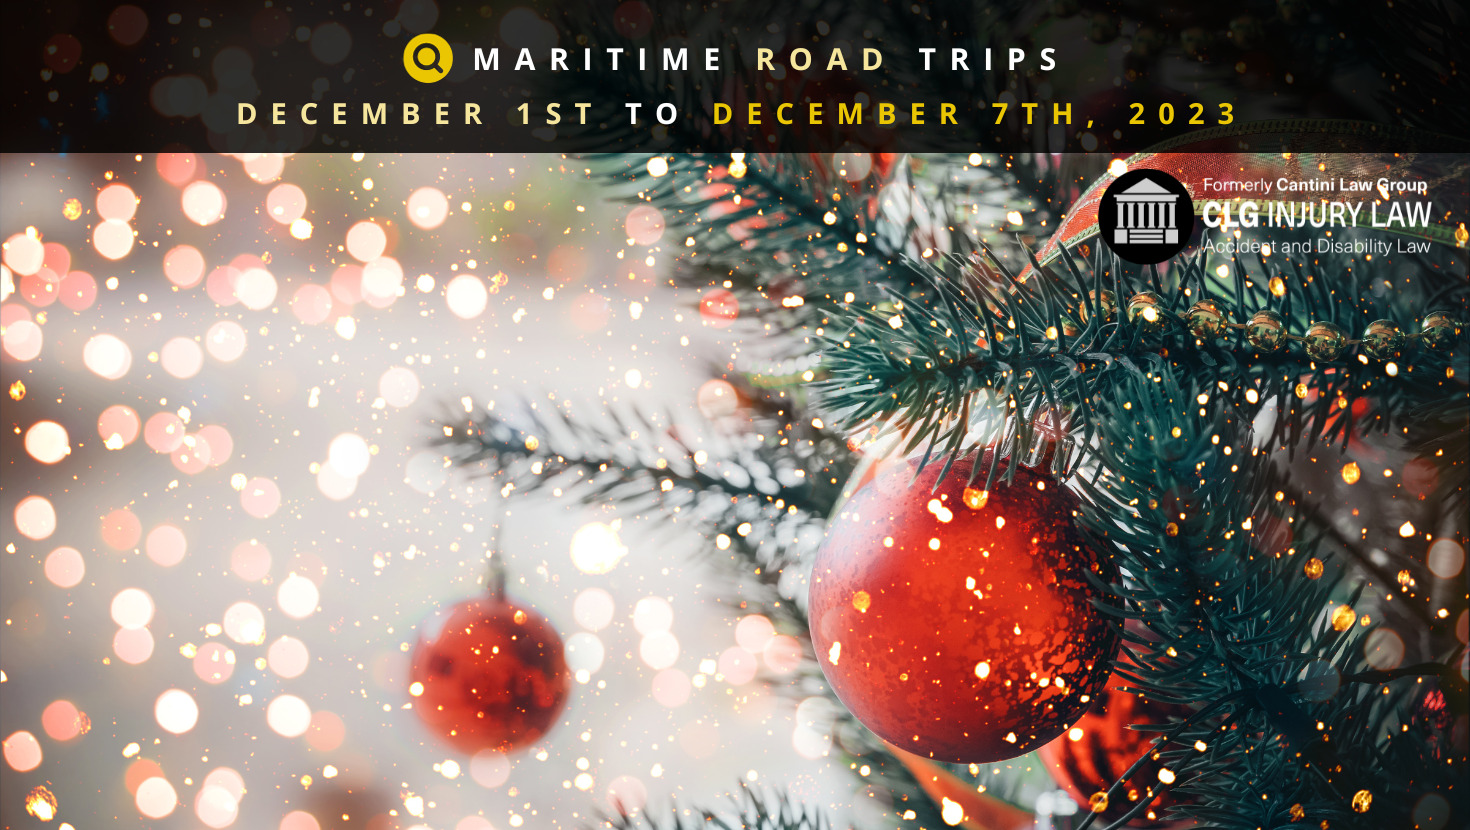 Maritime Road Trips: Destination Drives for the Week of December 1st to December 7th, 2023